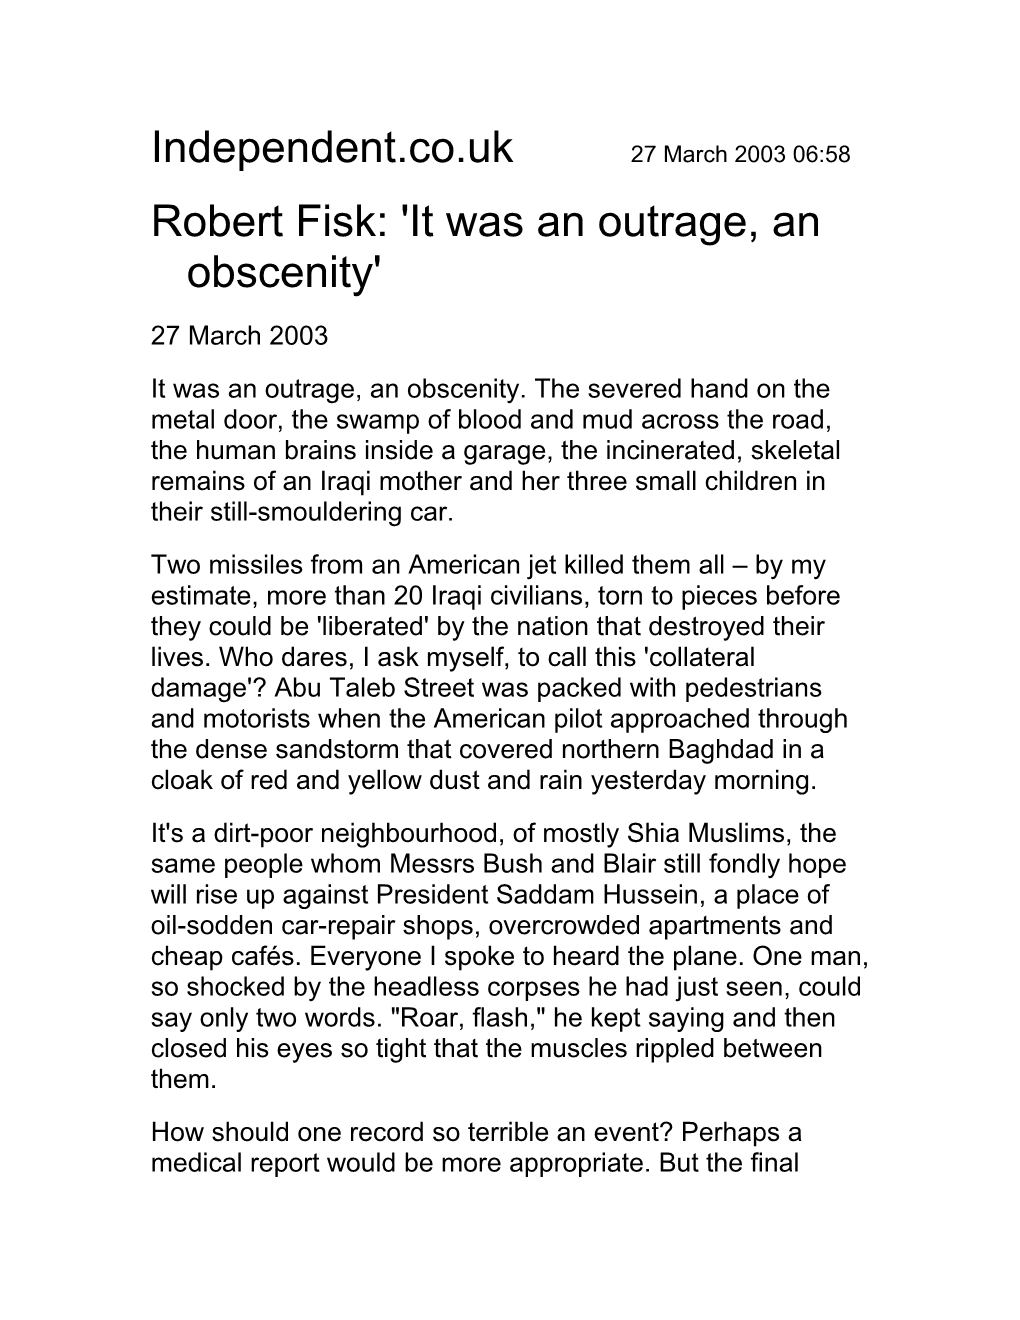 Robert Fisk: 'It Was an Outrage, an Obscenity'